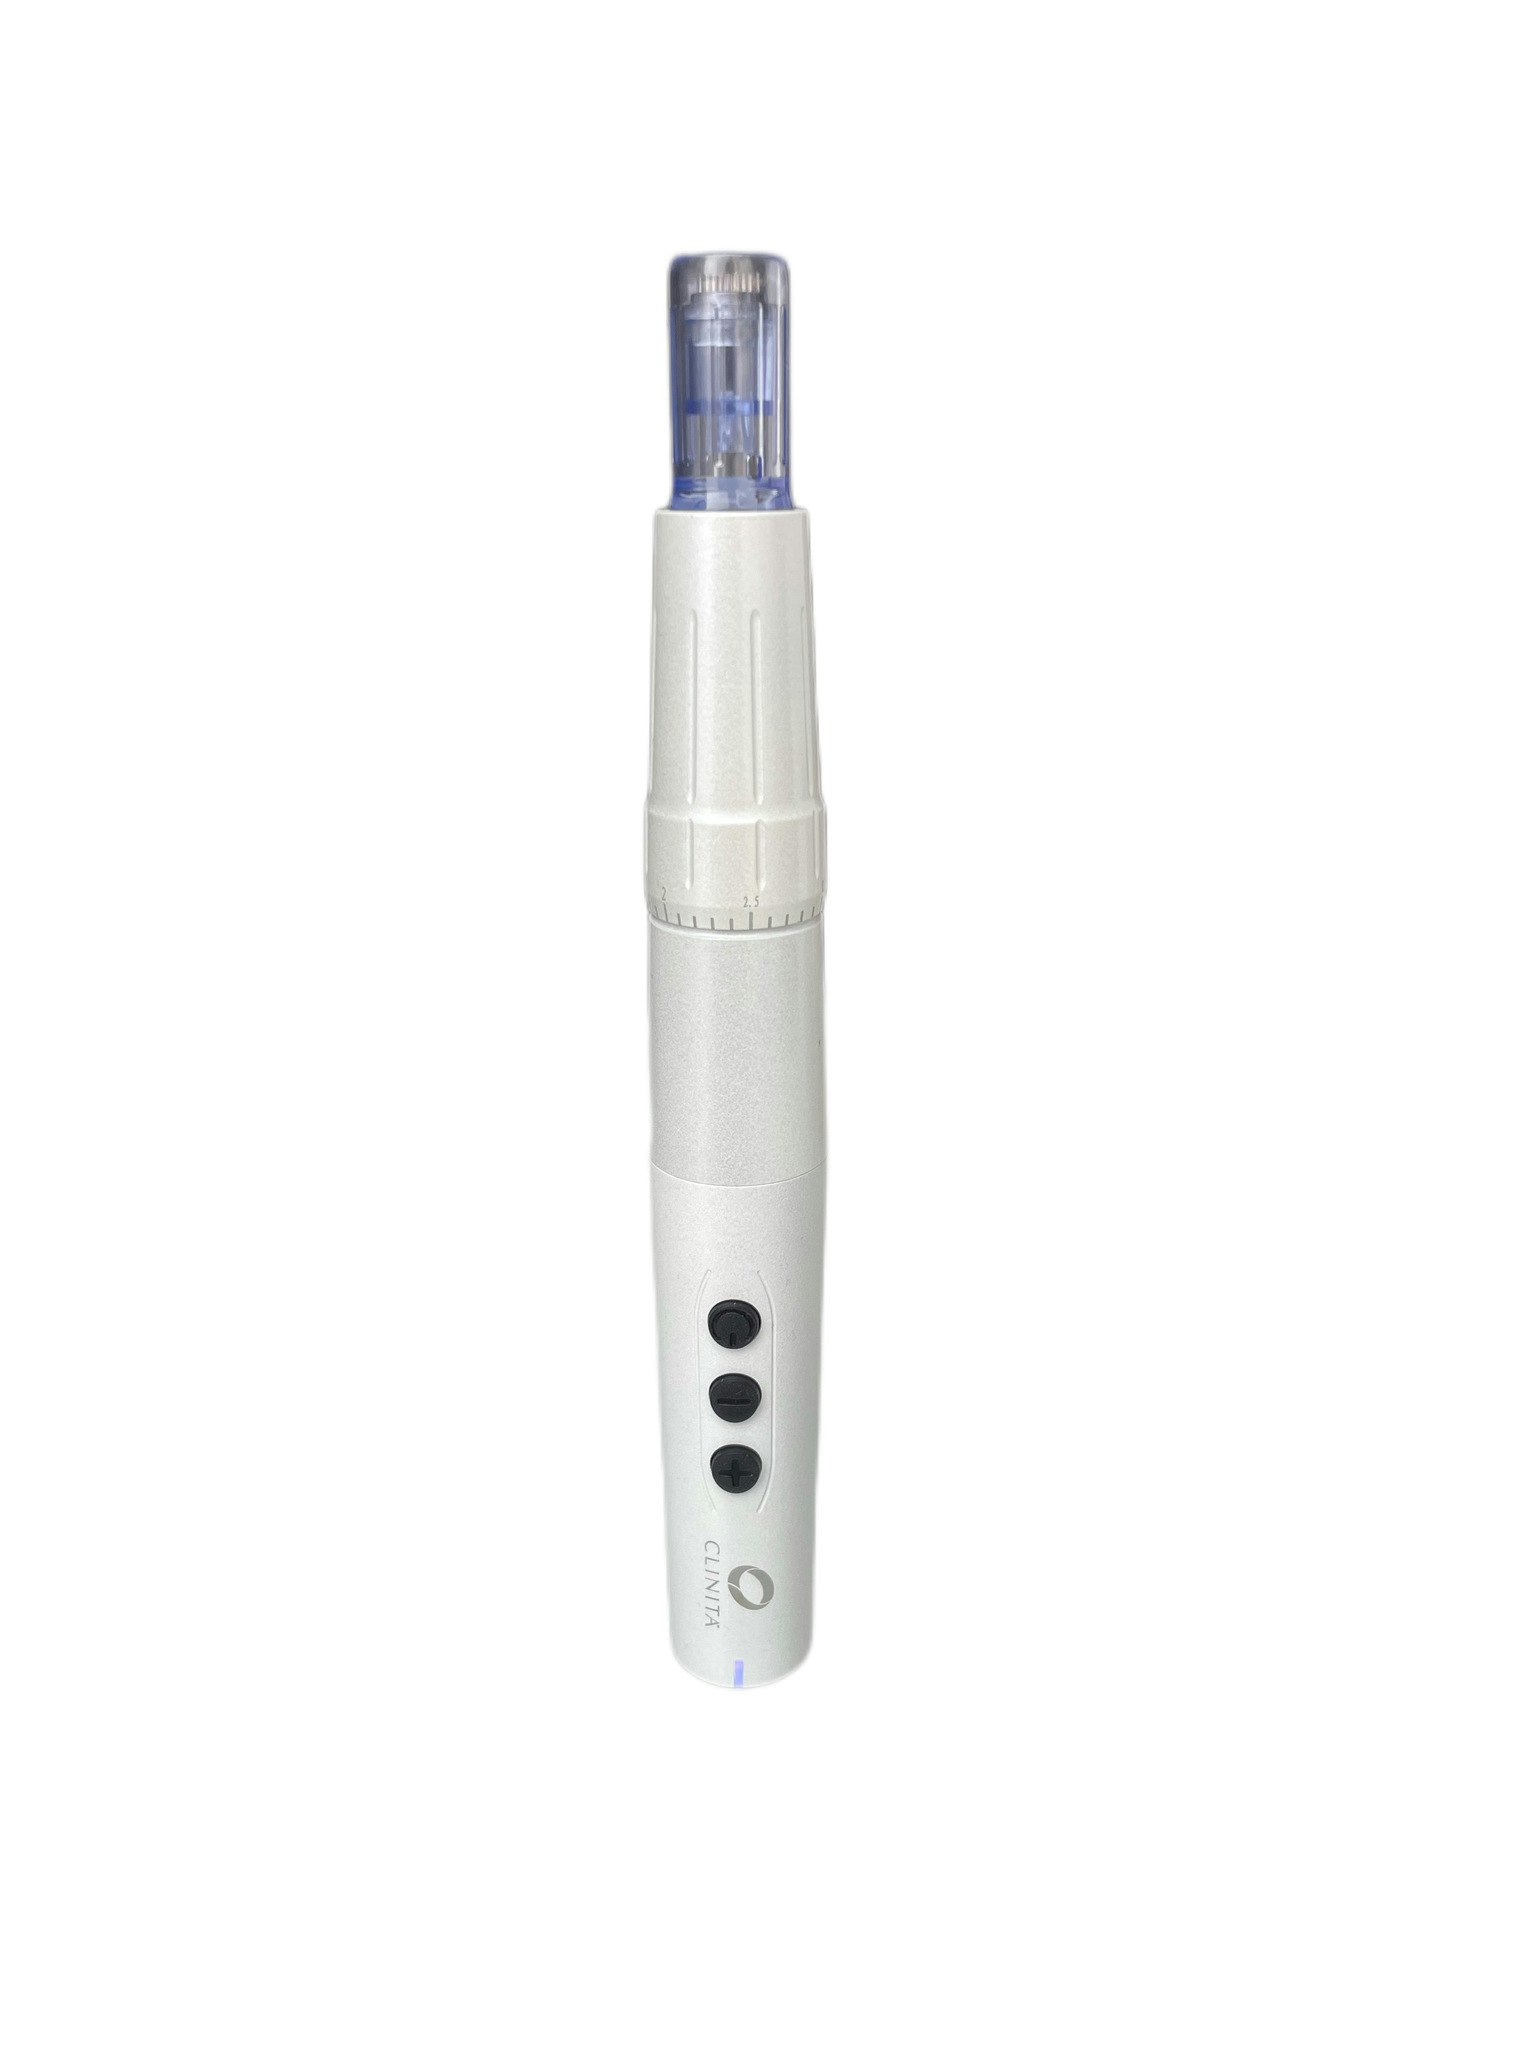 FLY Microneedling 36 point